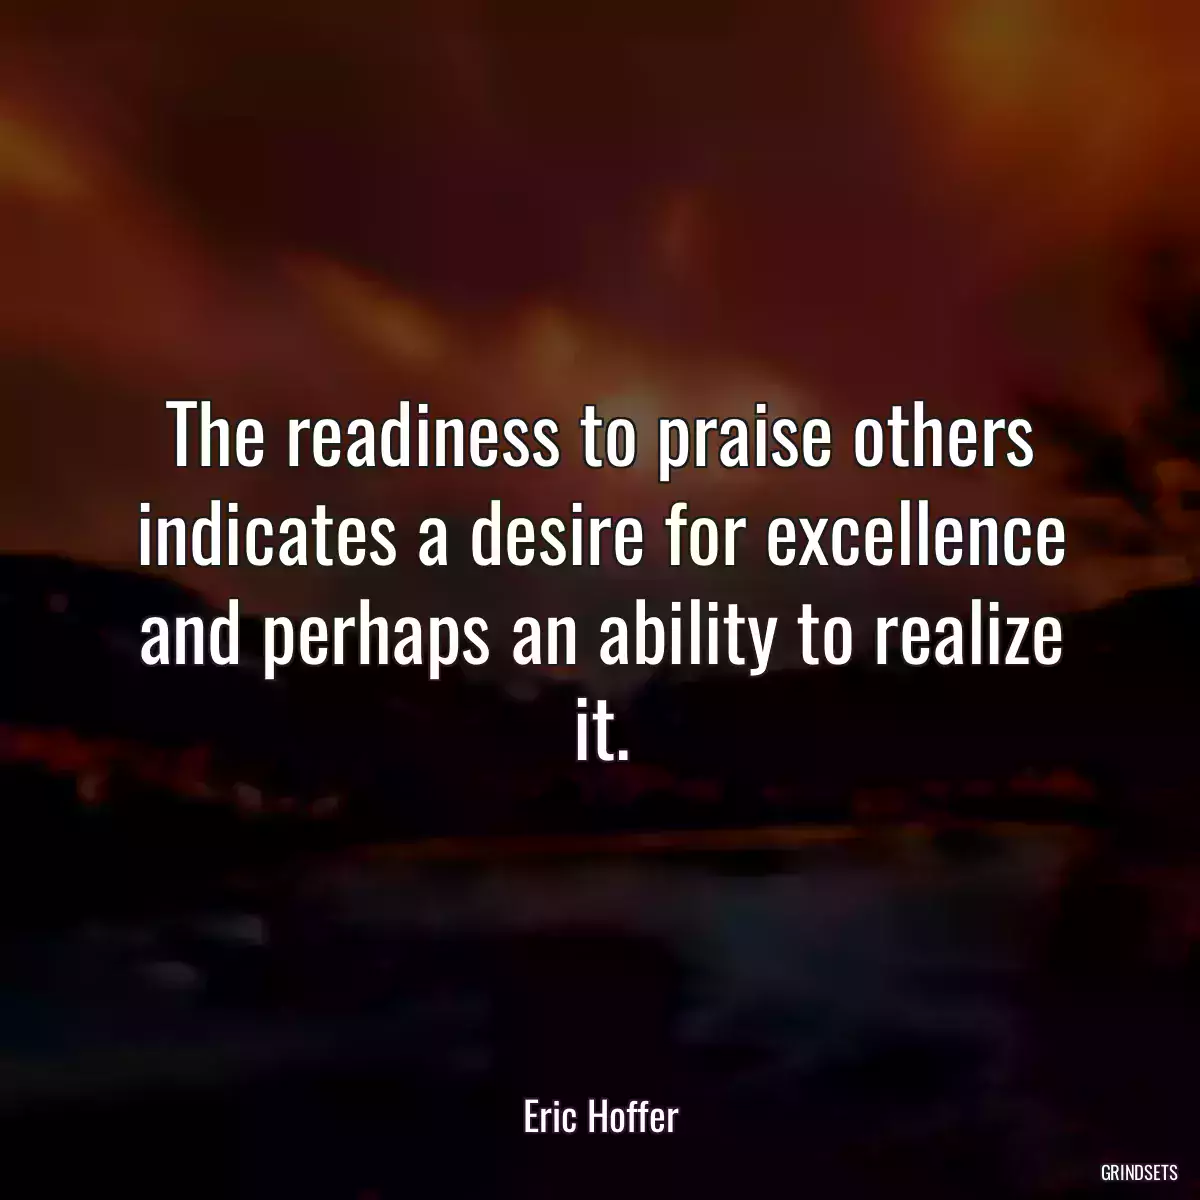 The readiness to praise others indicates a desire for excellence and perhaps an ability to realize it.